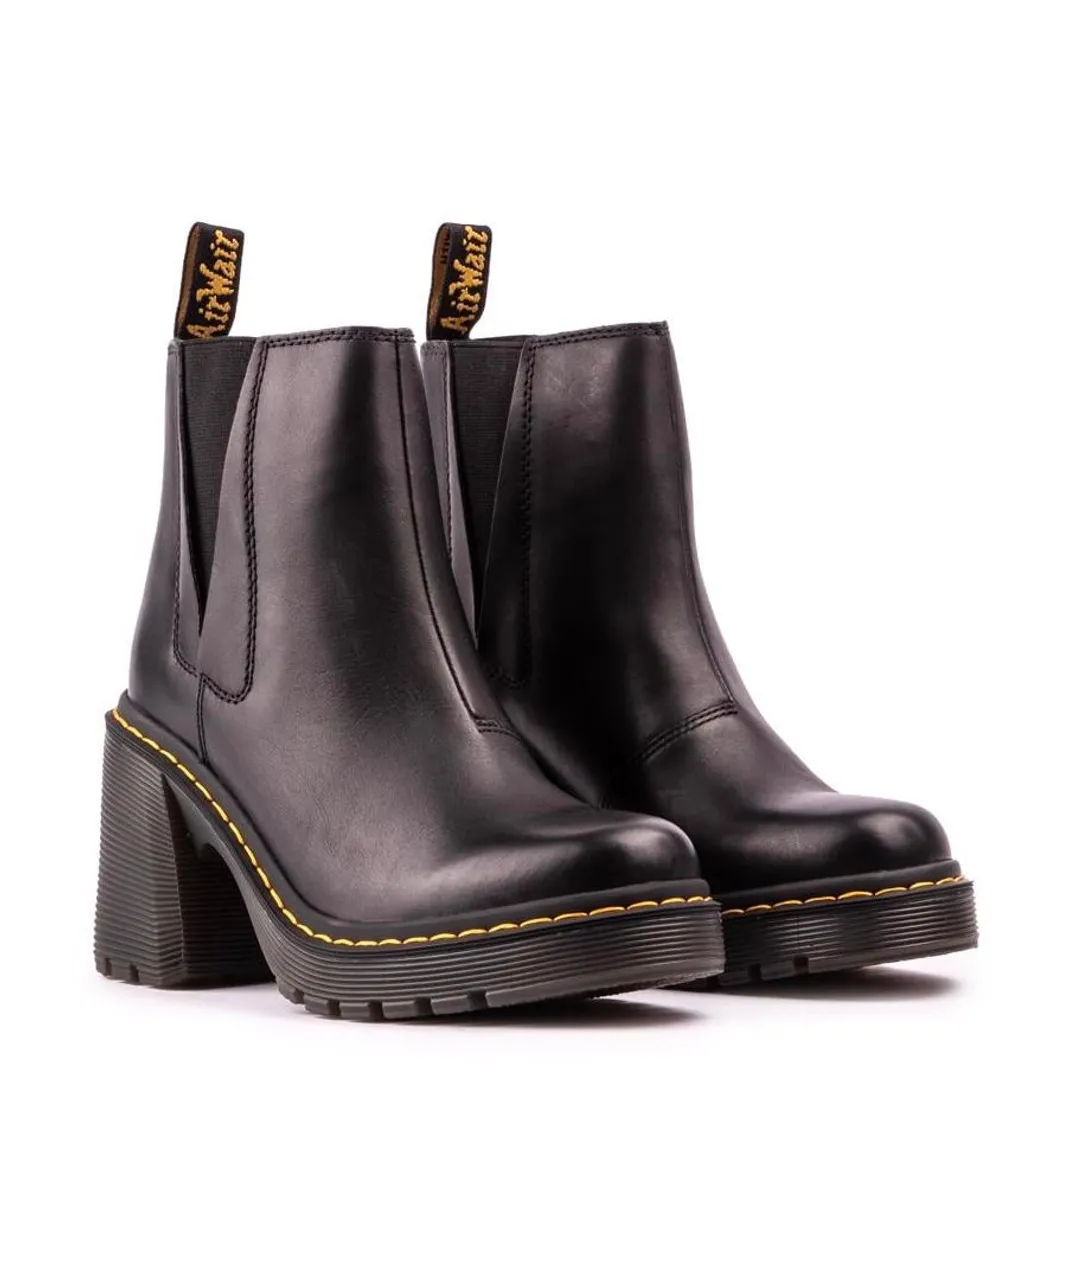 Dr Martens Womens Spence Boots - Black